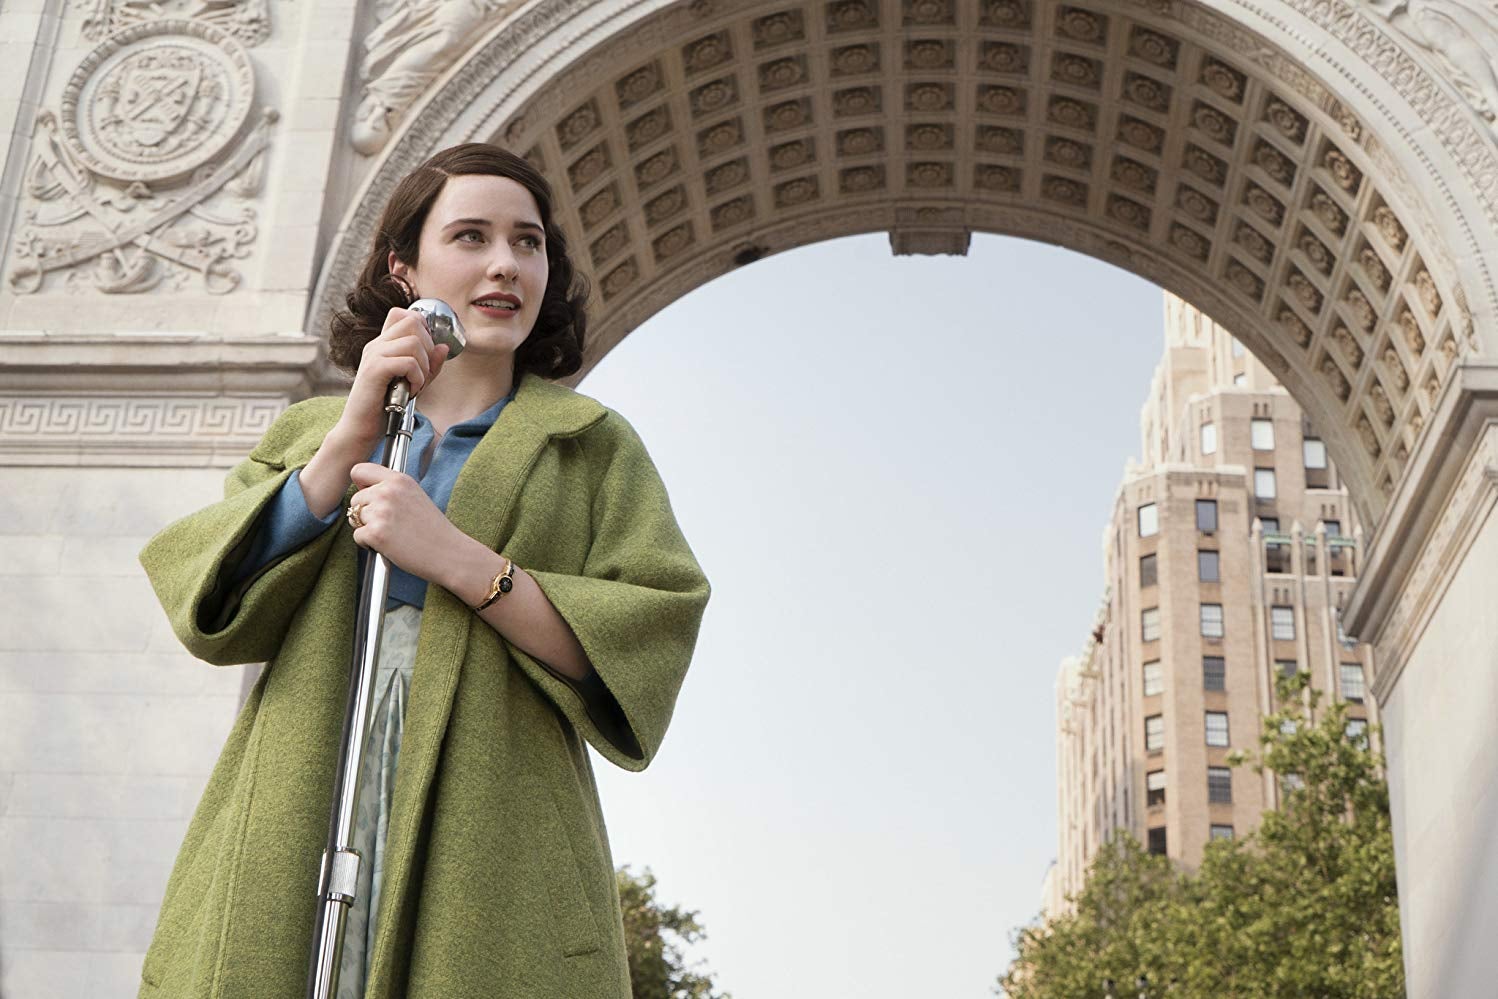 Rachel Brosnahan stands on front of a microphone wearing a green coat.